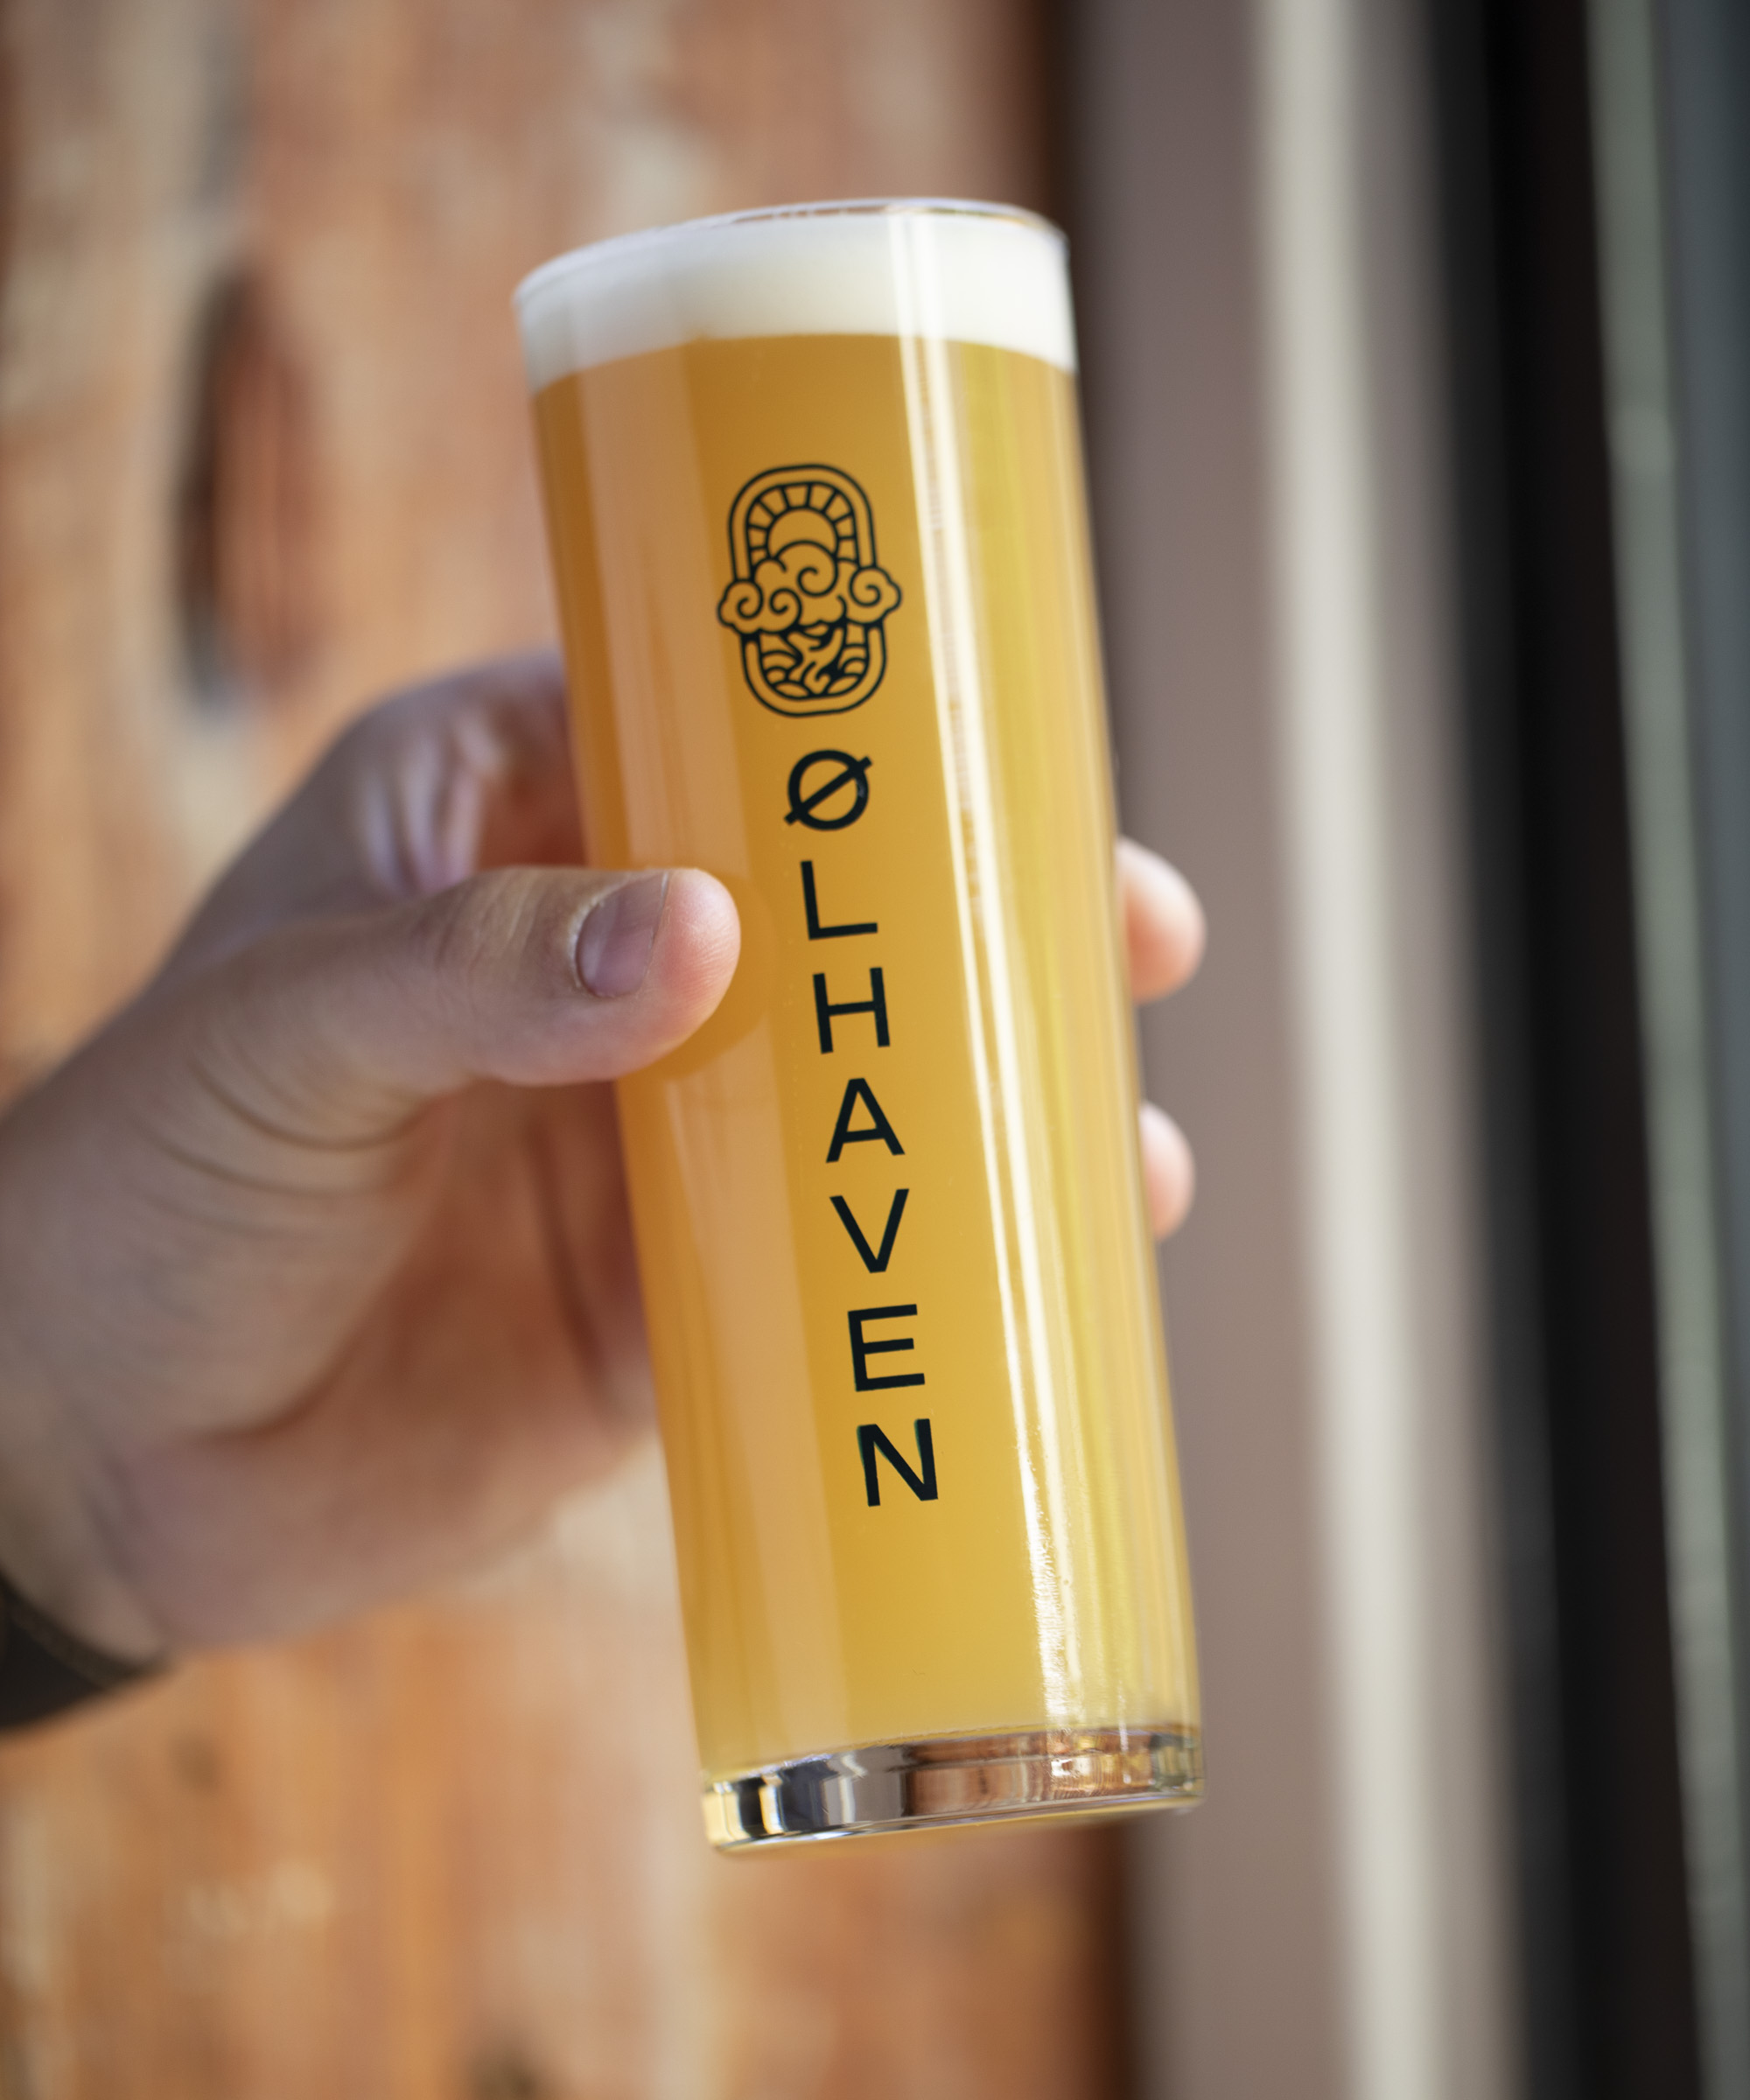 Pick any two draft beers at Ølhaven – Hidden just a stone’s throw from Kongens Nytorv is a secret new oasis with Japandi vibes and Denmark’s best microbrews on tap